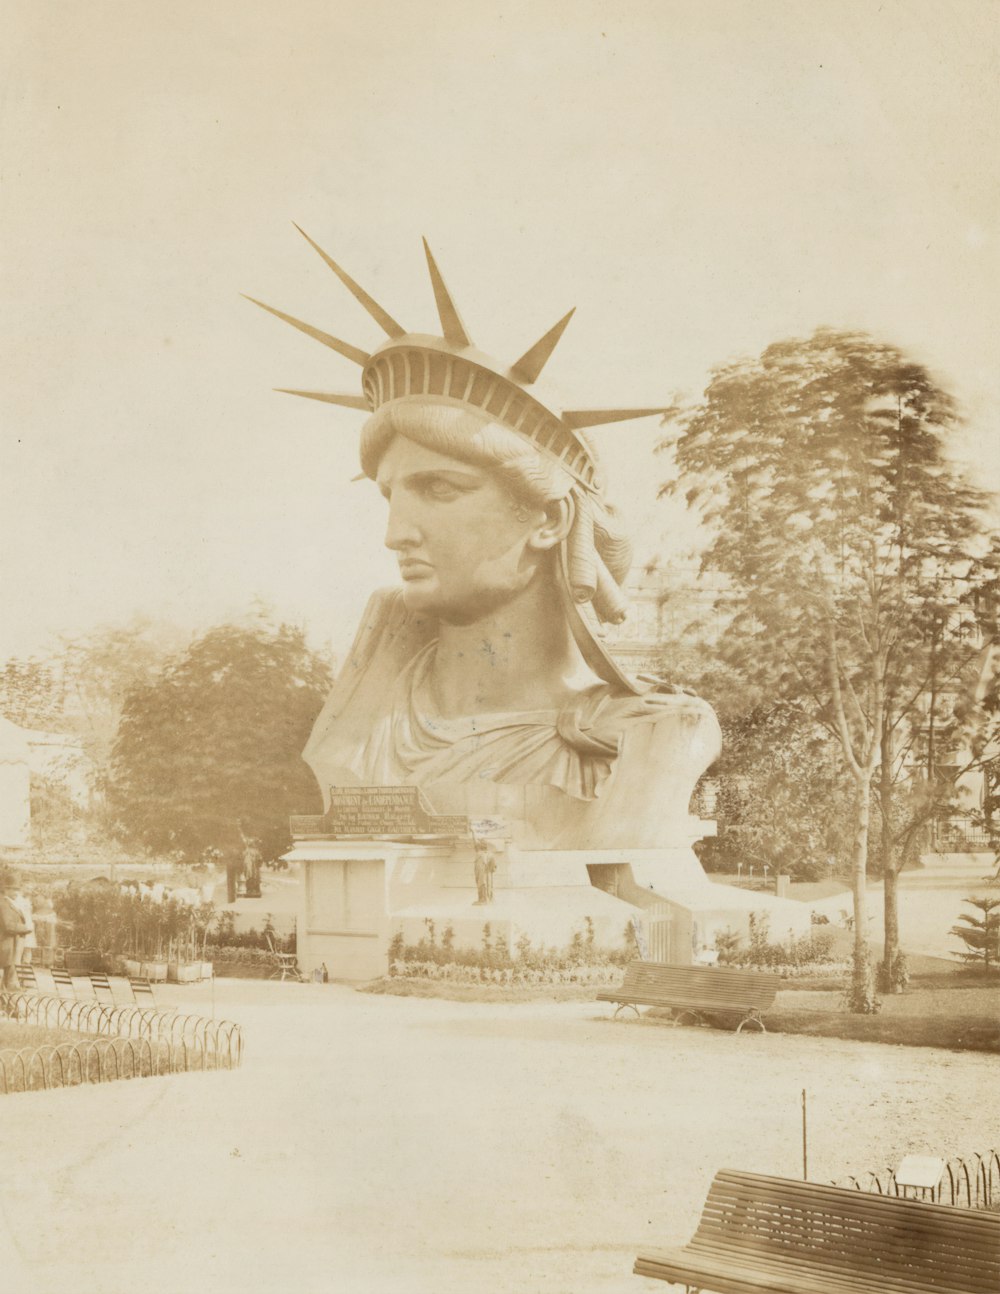 Historical image of the Statue of Liberty 